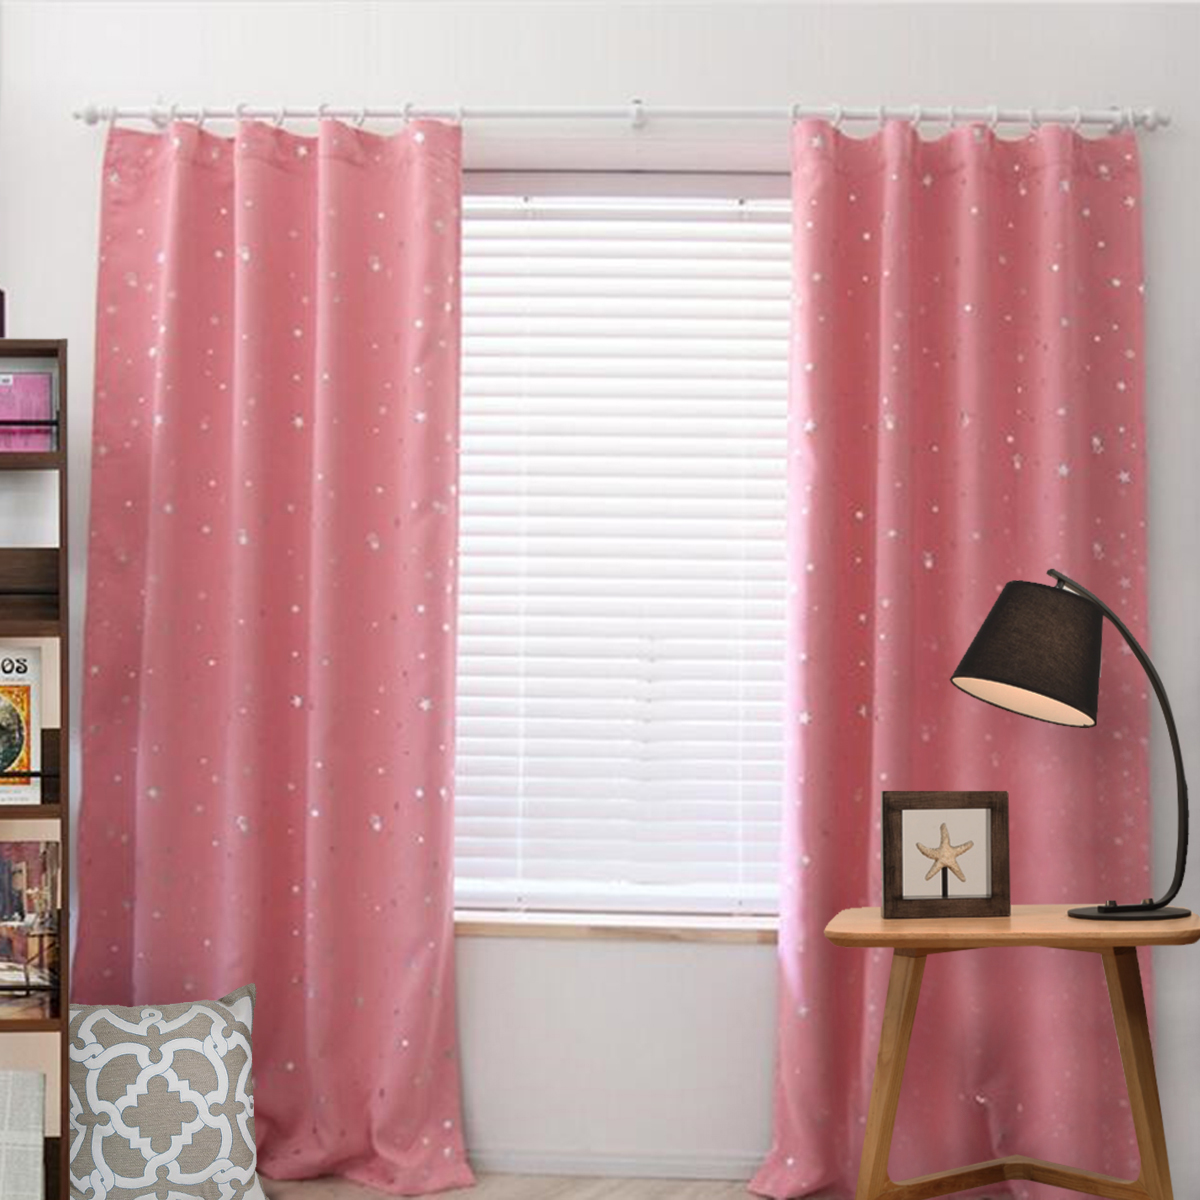 Kids Boys Girls Window Curtains Blackout Room Thermal Insulated Bedroom Decor 